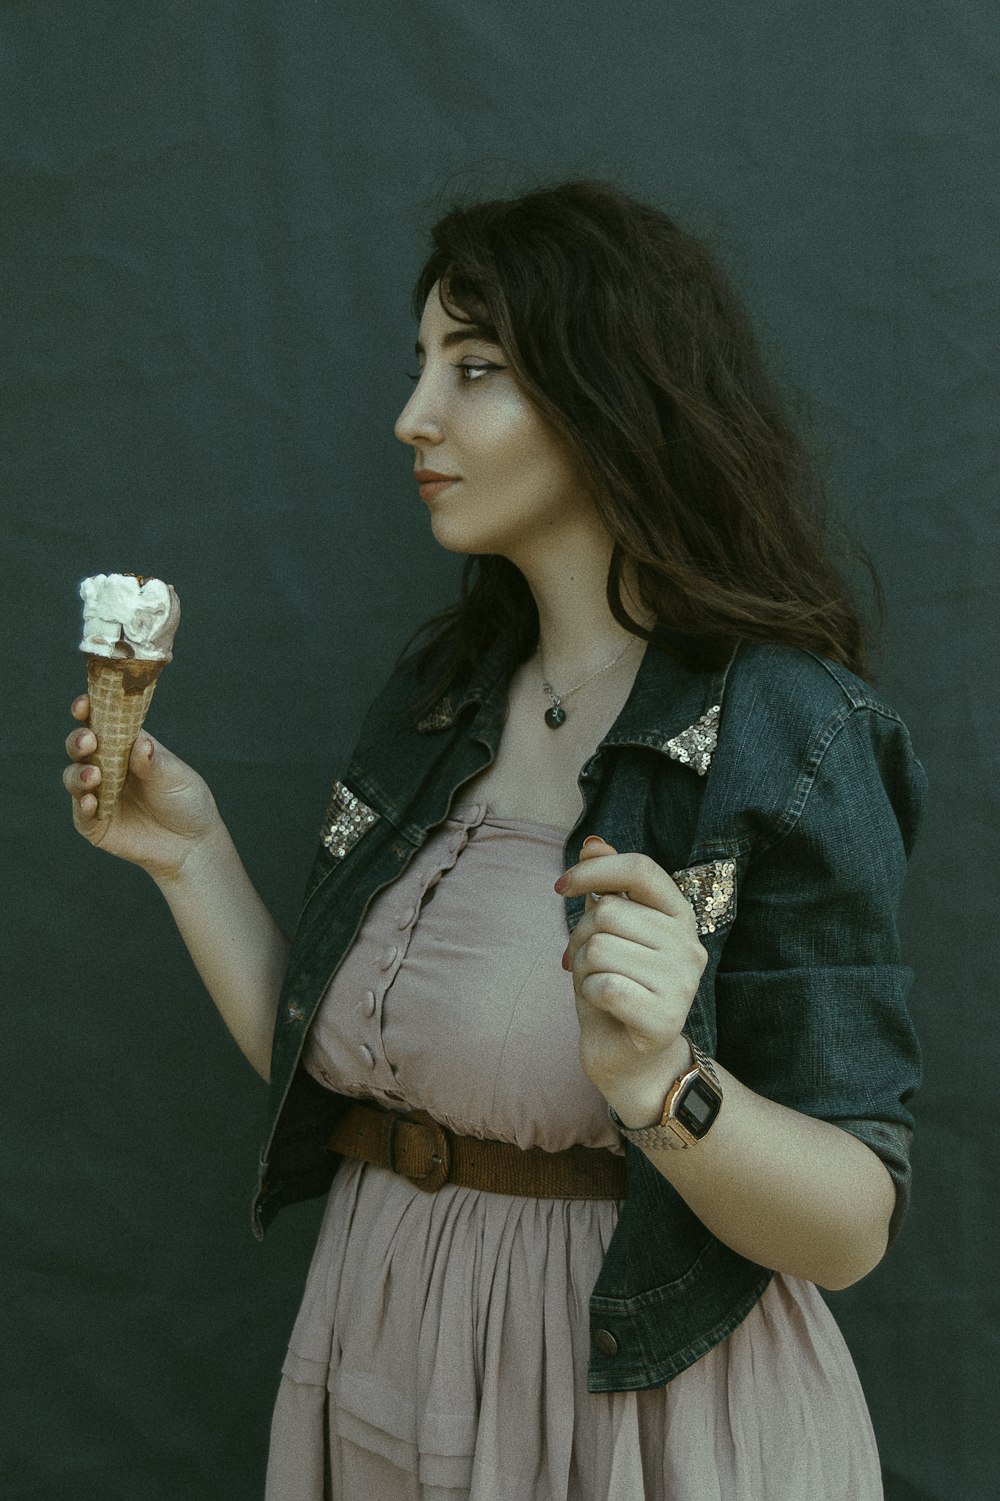 woman holding an ice cream cone on right hand